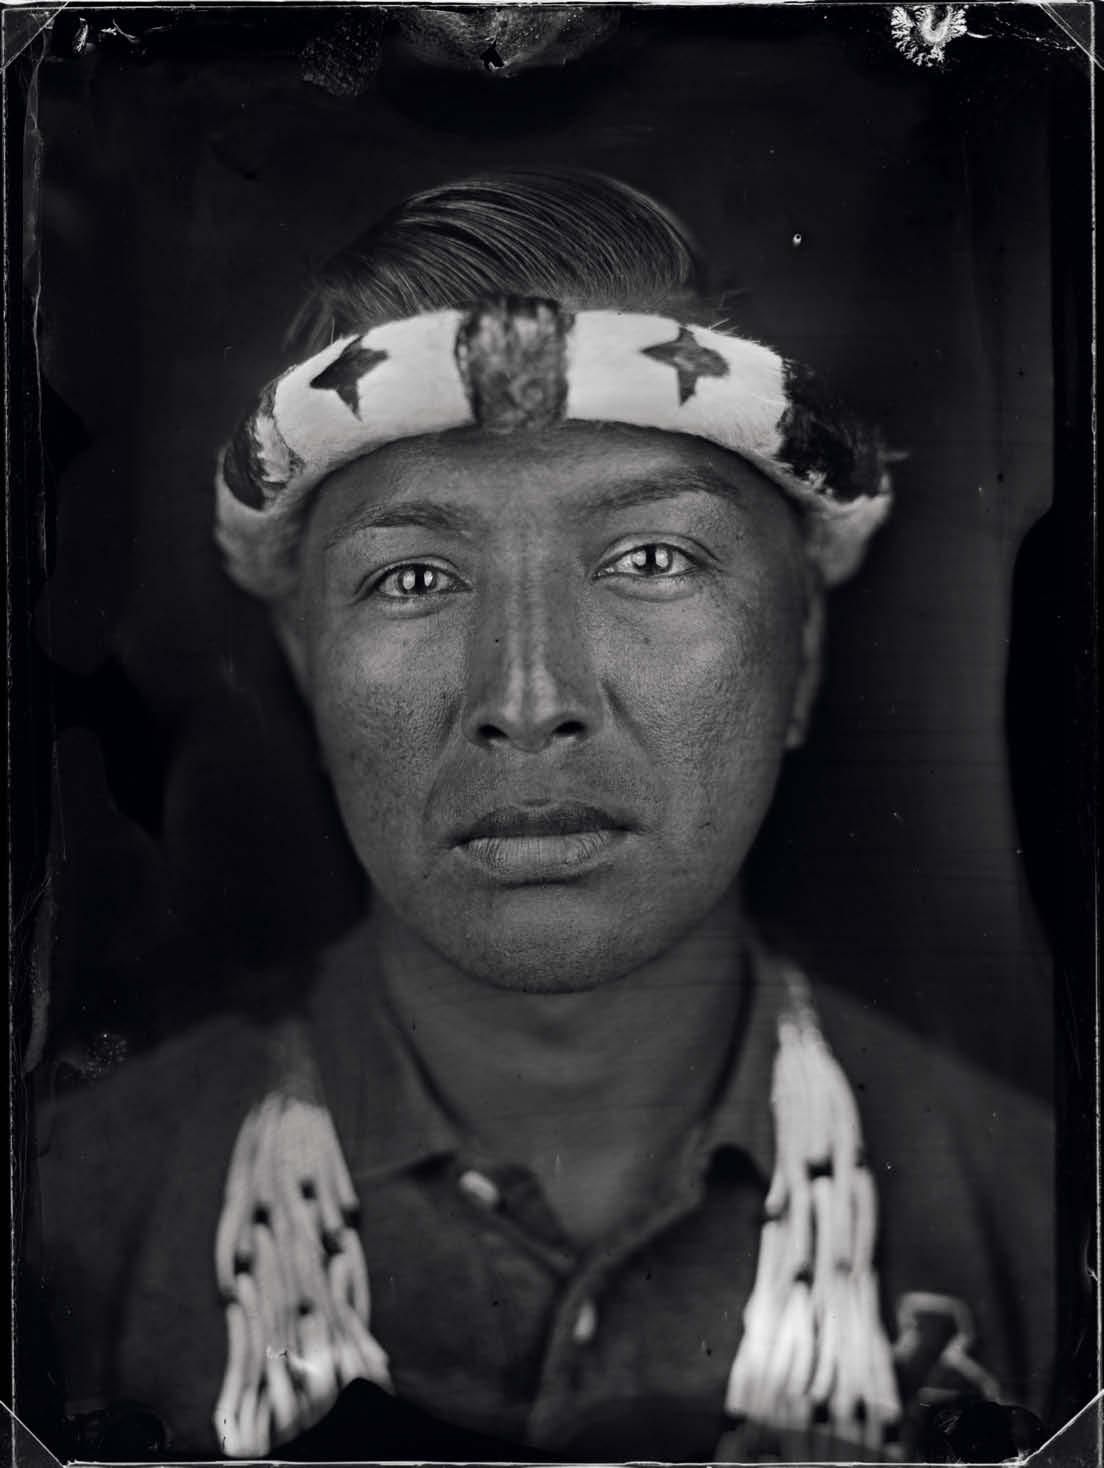 Ralph Peters III of the Hupa tribe in Hoopa Valley, California. After the United States took control of Alta California in 1846, extermination campaigns reduced the indigenous population from 150,000 to 30,000 in less than thirty years. The US government recognized Hupa sovereignty over their land in 1864. Many still live there today. Image by Tomas Van Houtryve. California, 2018.